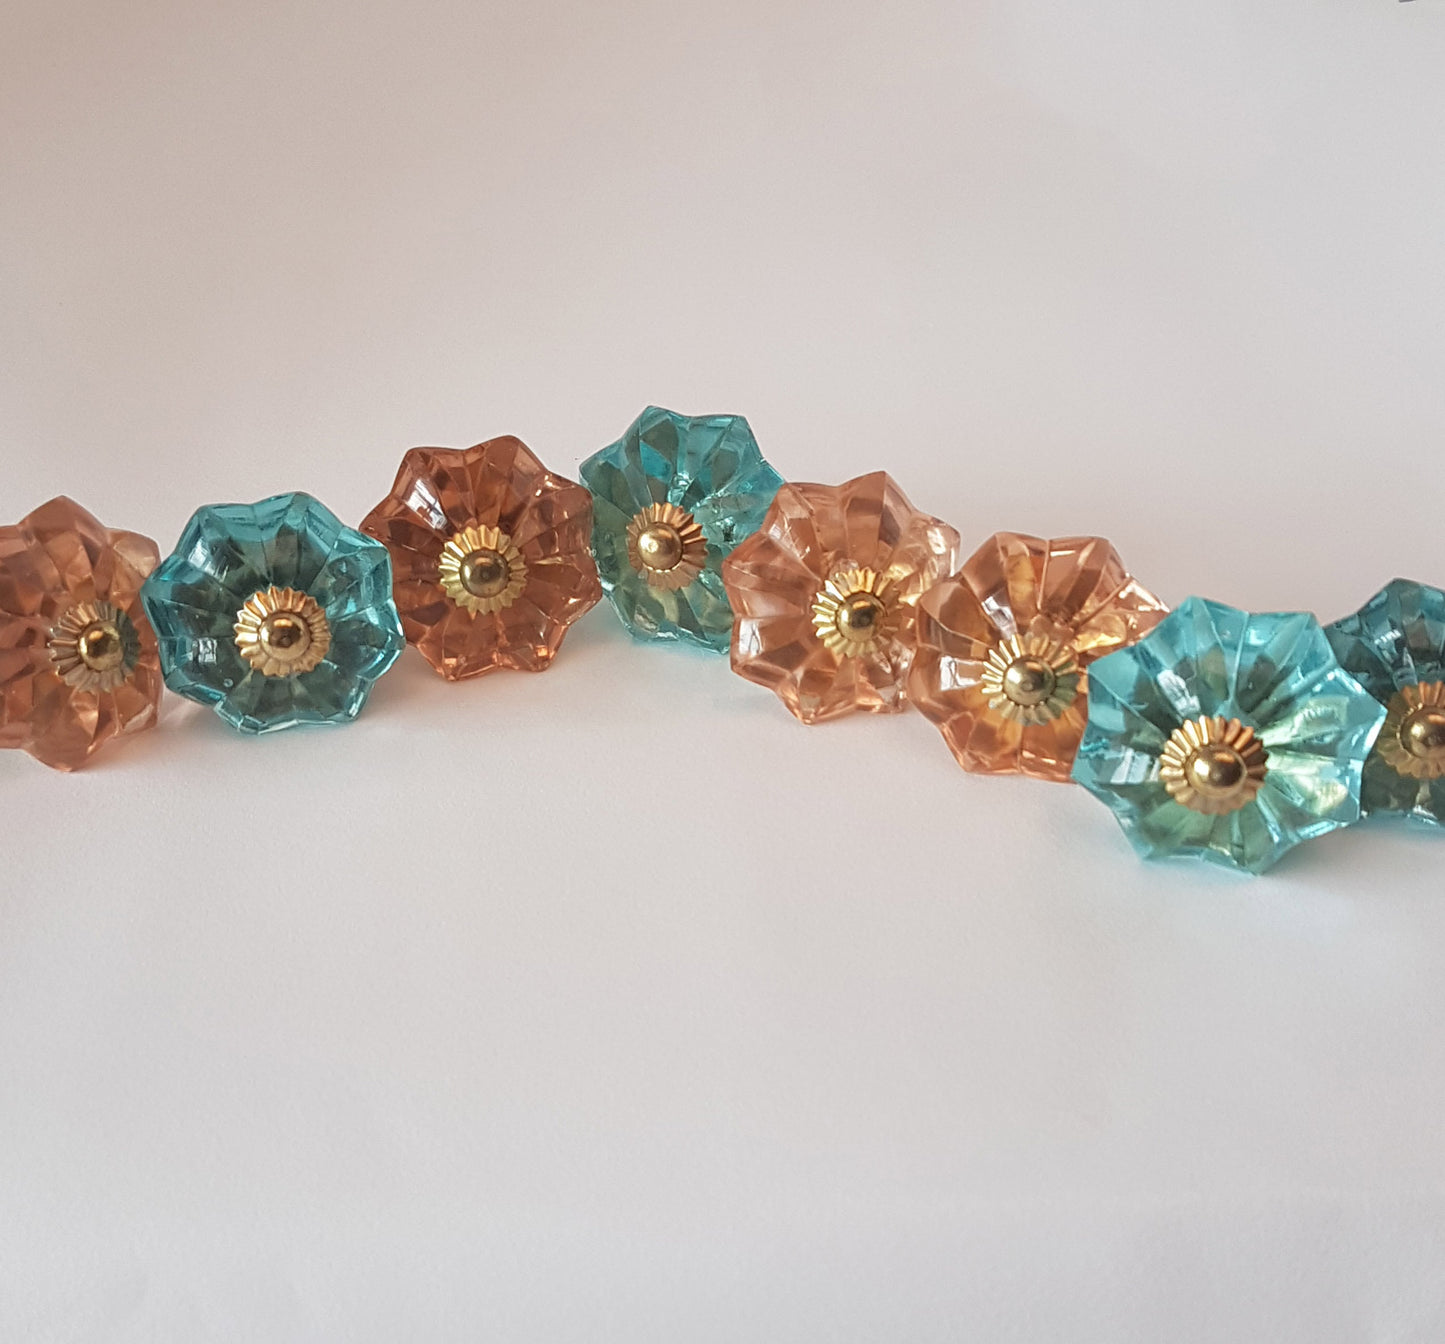 Set of 8 knobs: 4 faux aquamarine & 4 rose crystal look cabinet knobs. 8 piece collection of cupboard and drawer pulls for furniture. - Vintage India Ca